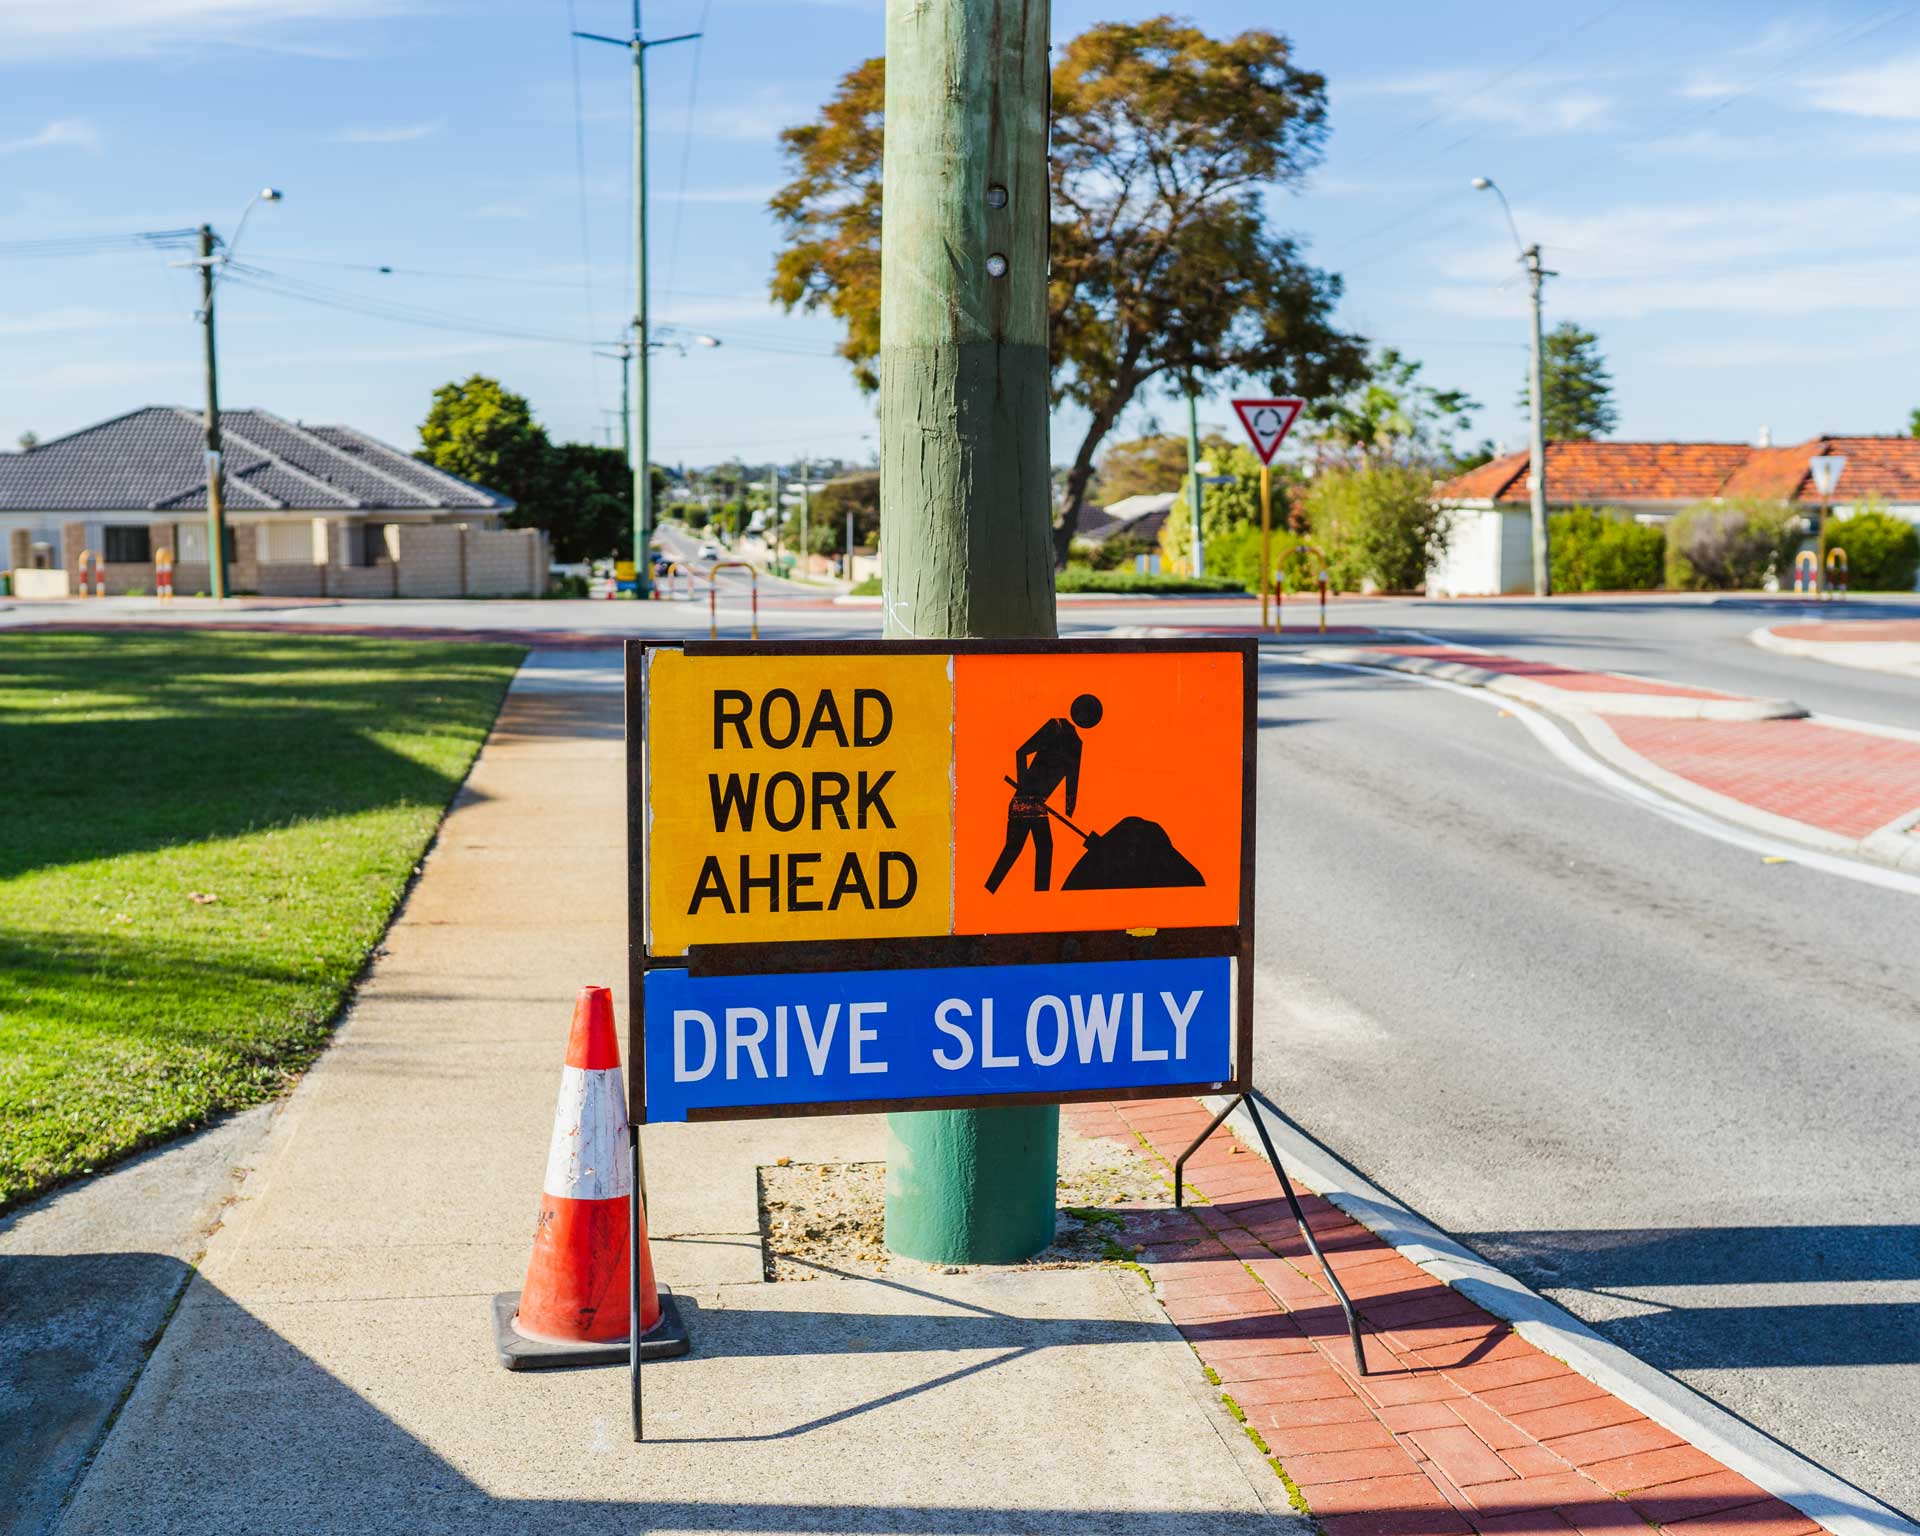 Roadwork sign instructing cars to drive slowly.